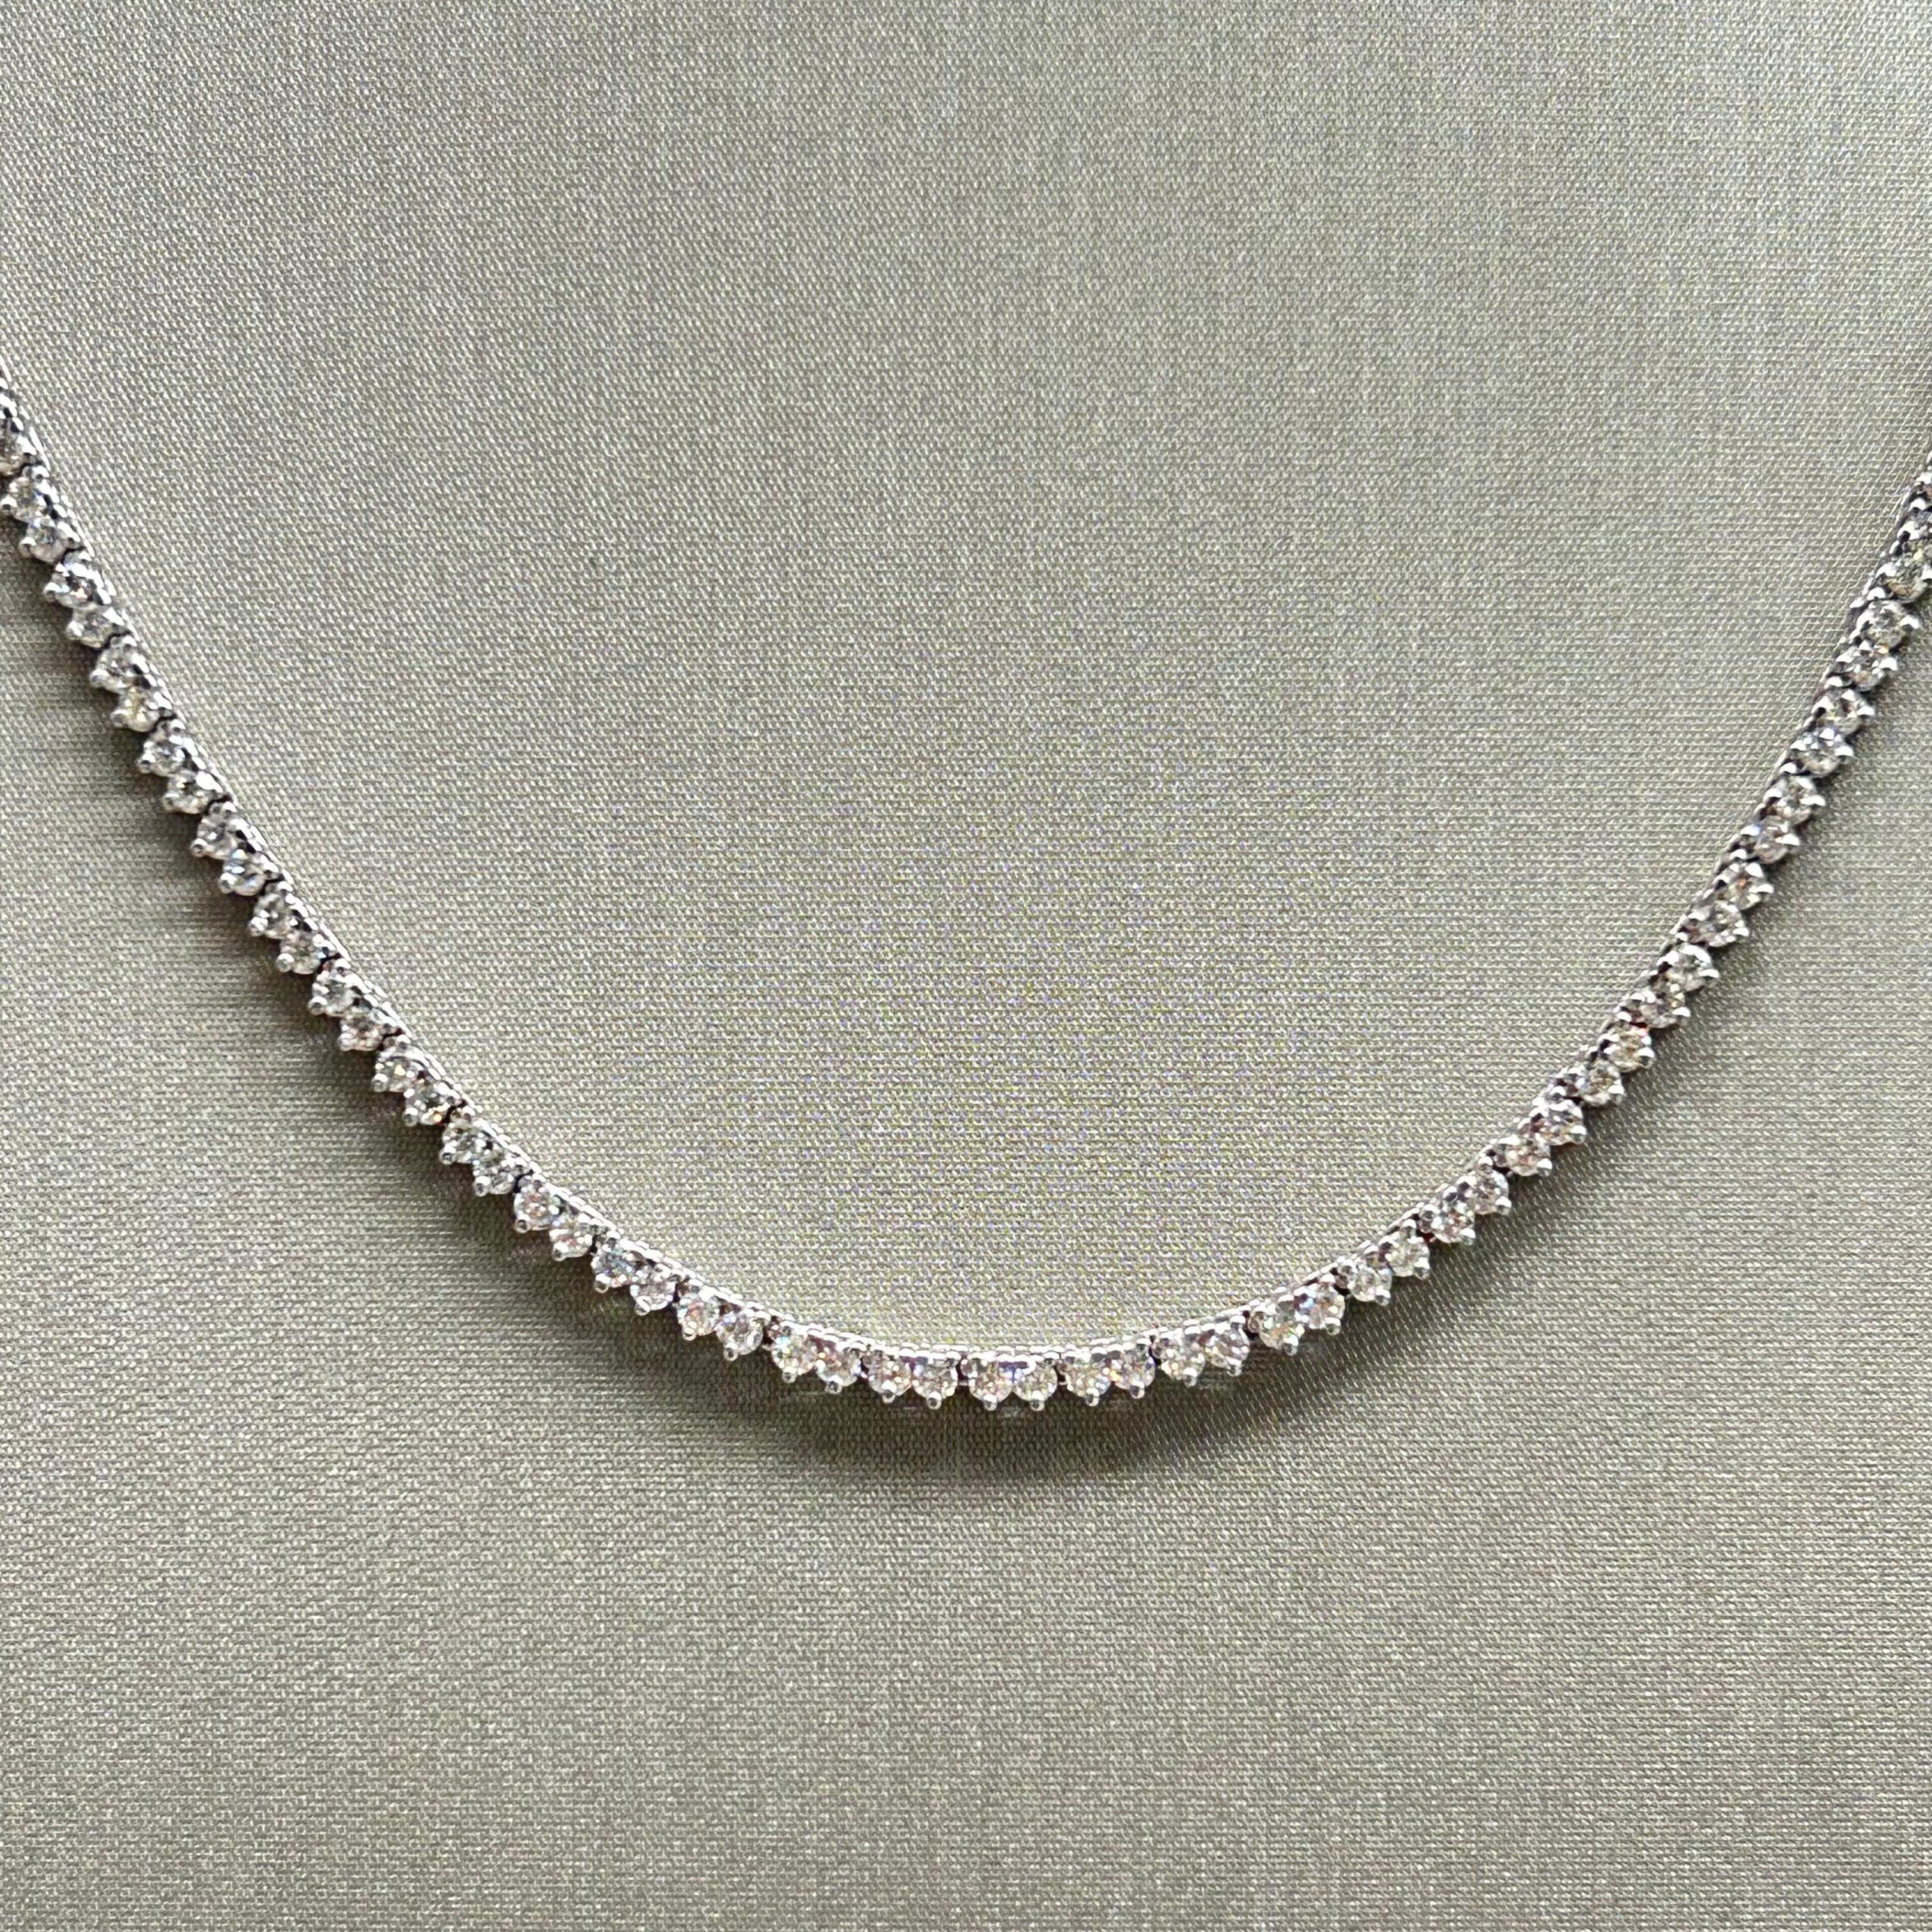 Beautiful white gold tennis necklace with 4.6 tcw of white round brilliant diamonds ( color J-K , Clarity VS ) This necklace is 21” but can be resize . It is a classic piece that gives you and elegant and sleek look. It can be worn in any occassion